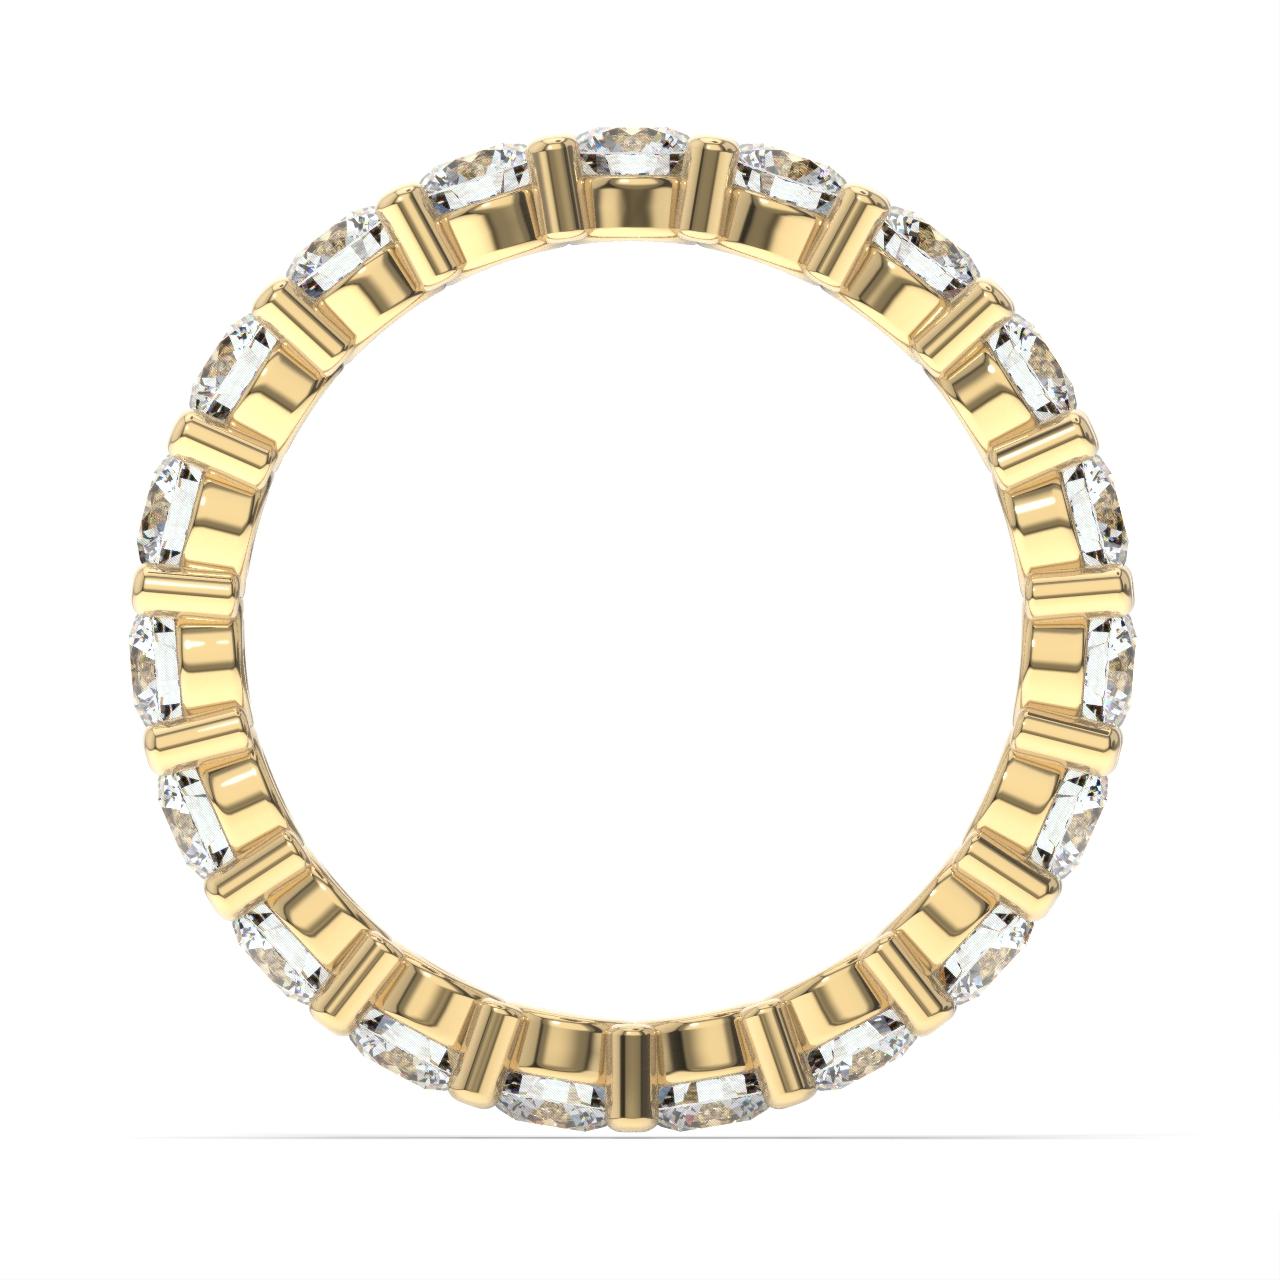 Timeless and classic. This eternity band features a perfectly matched round brilliant diamonds shared prong set. Experience the difference!

Product details: 

Center Gemstone Color: WHITE
Side Gemstone Type: NATURAL DIAMOND
Side Gemstone Shape: